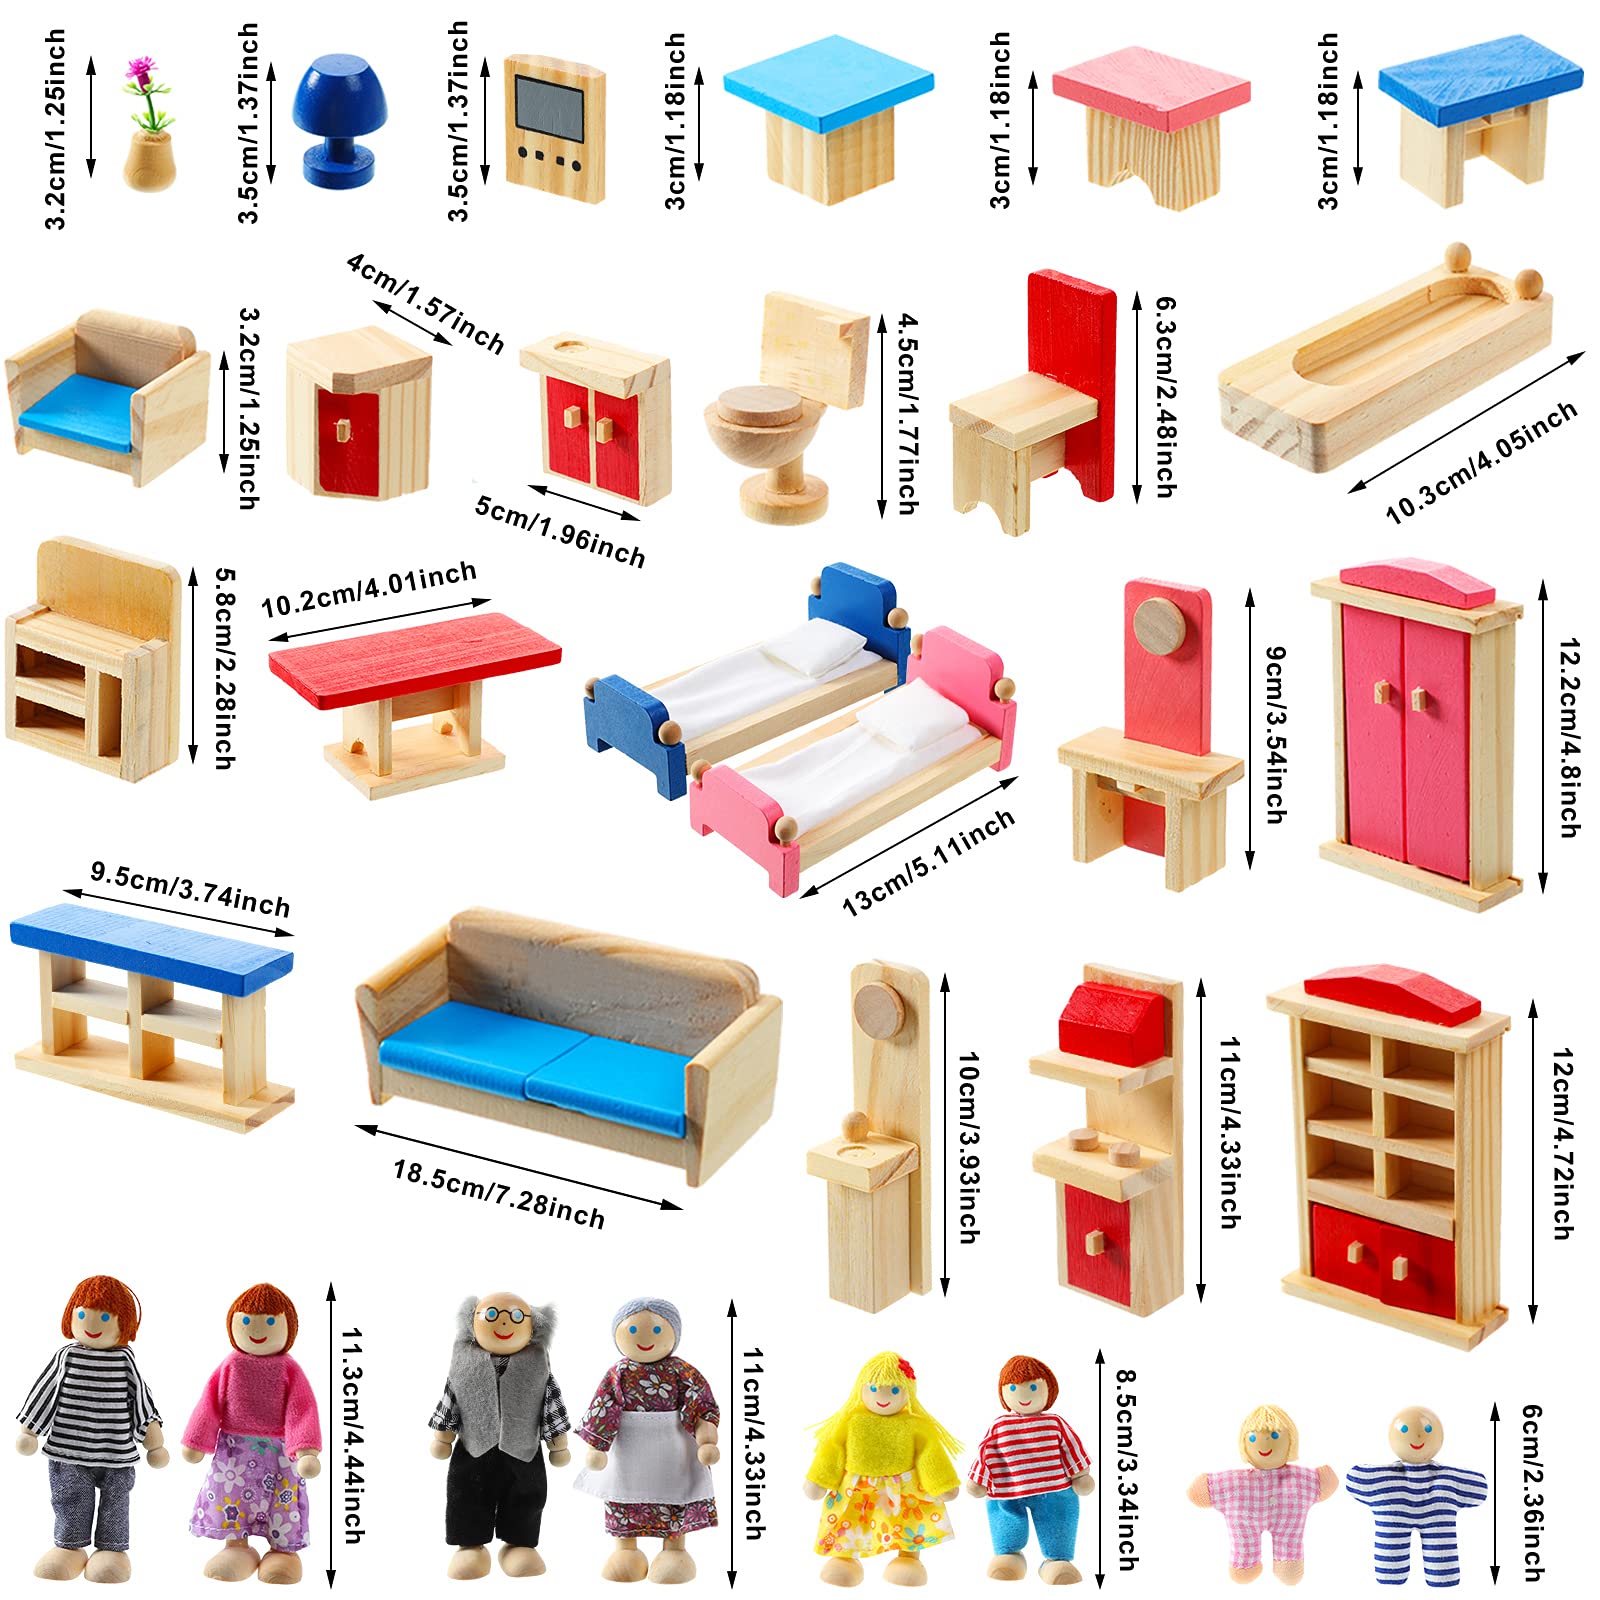 Wooden Dollhouse Furniture Doll House Furnishings with 8 Pieces Winning Doll Family Set, Dollhouse Accessories for Boys Girls Miniature Dollhouse, Family Figures Imaginative Play Toy (Classic Style)